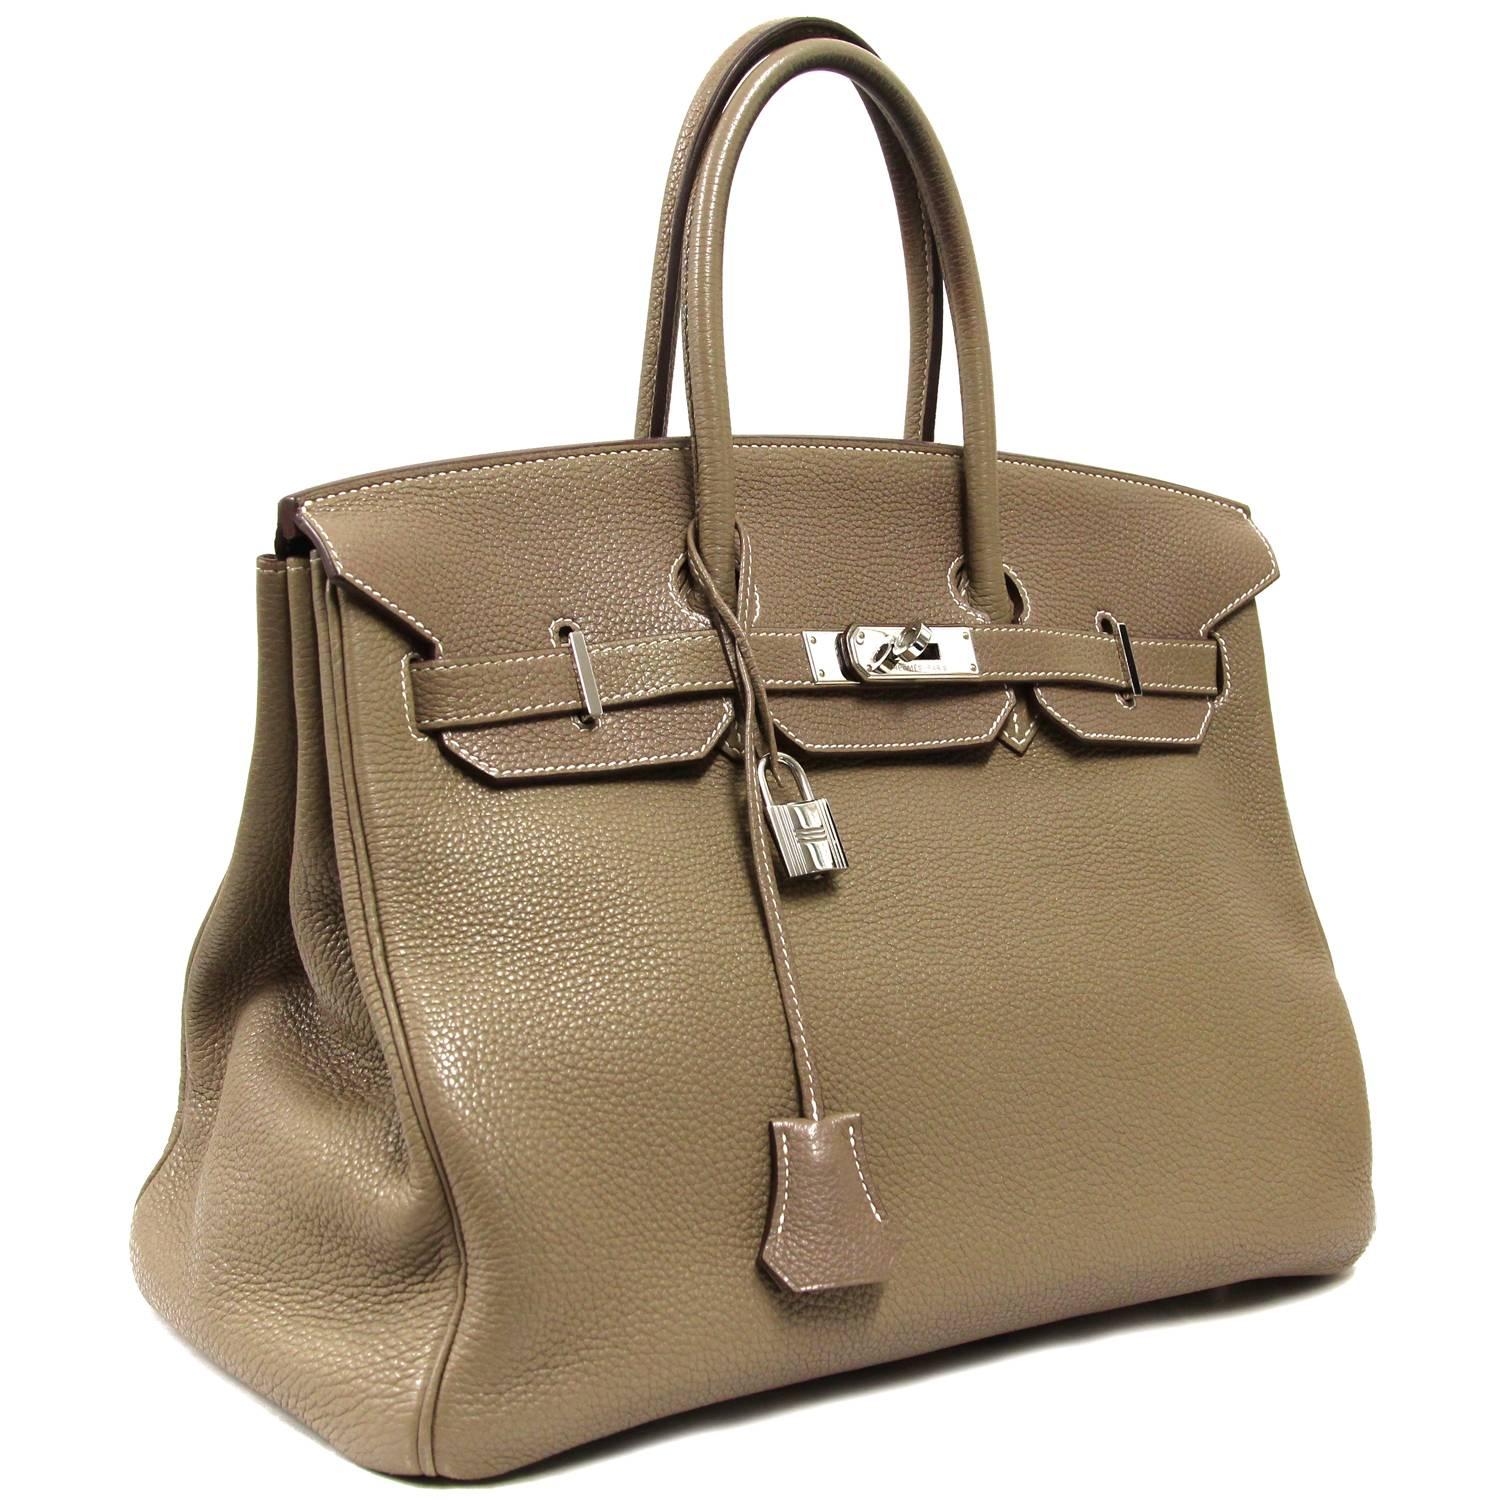 Fabulous Hermès Birkin bag 35 cm in taurillon clemence Leather "étoupe" color. According to the embossed code the item was produced in 2009, code: [M]. The item comes with padlock, keys and clochette and dustbag. The metallic parts have